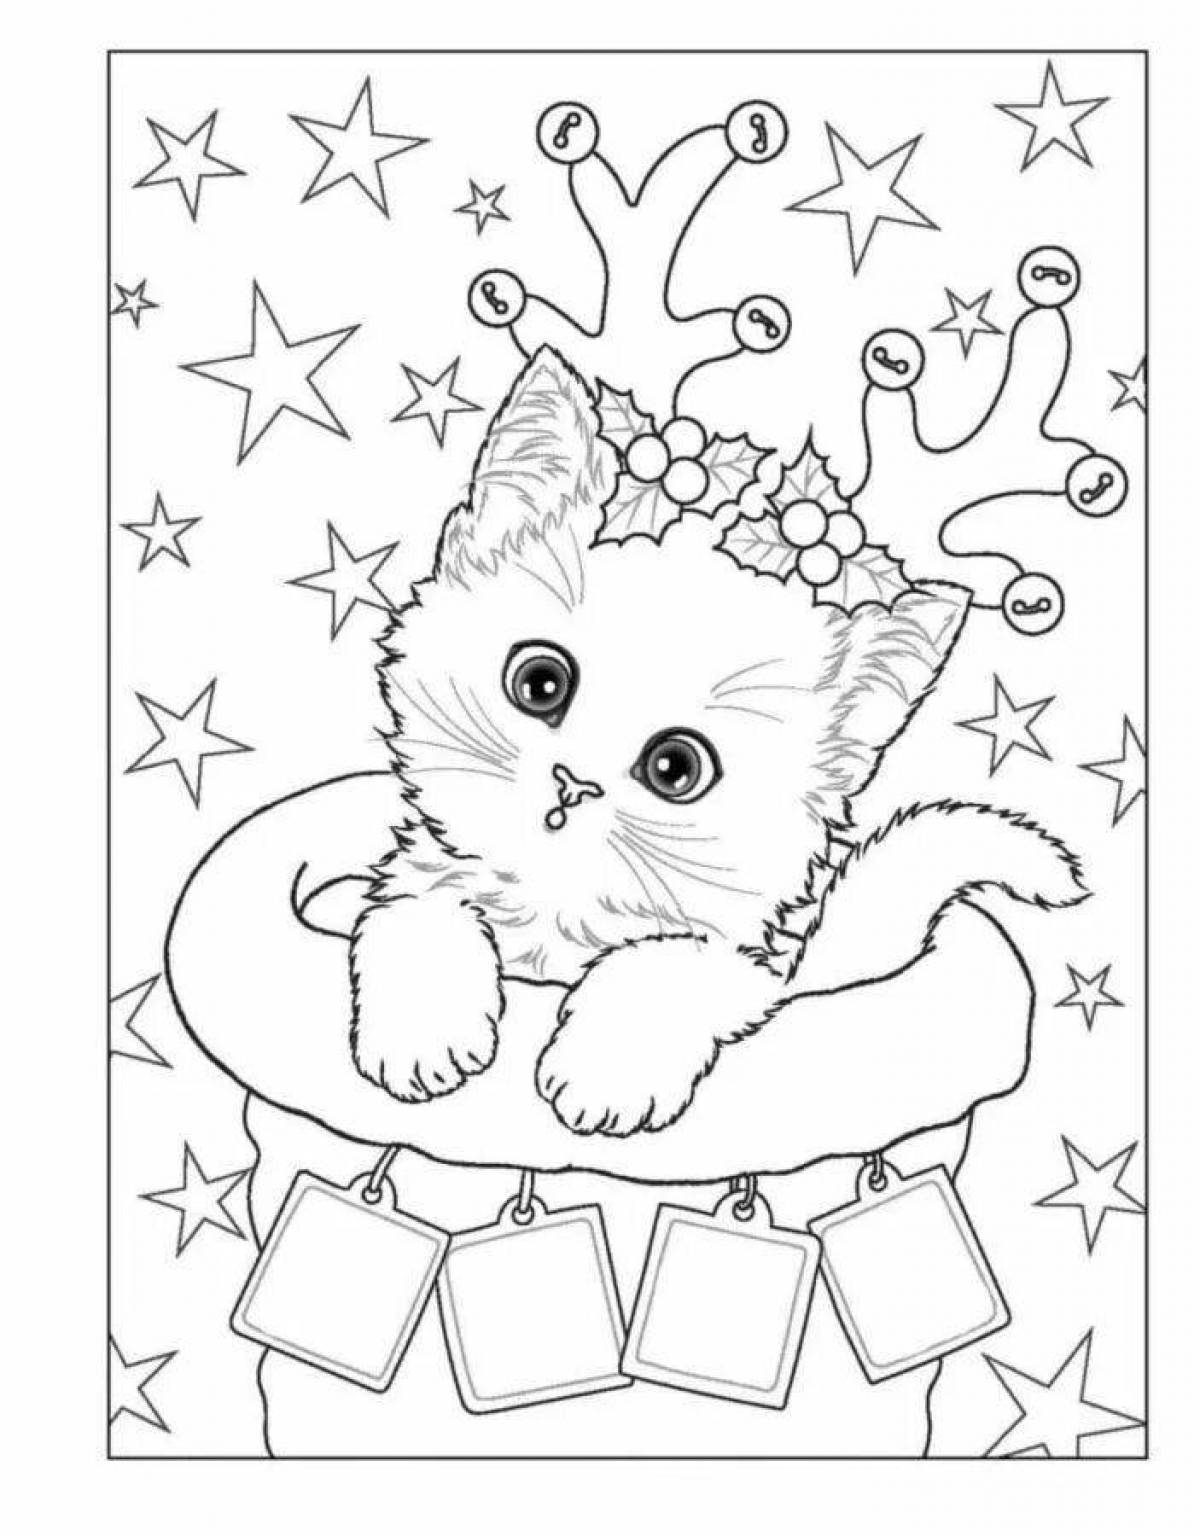 Coloring book glowing Christmas cat